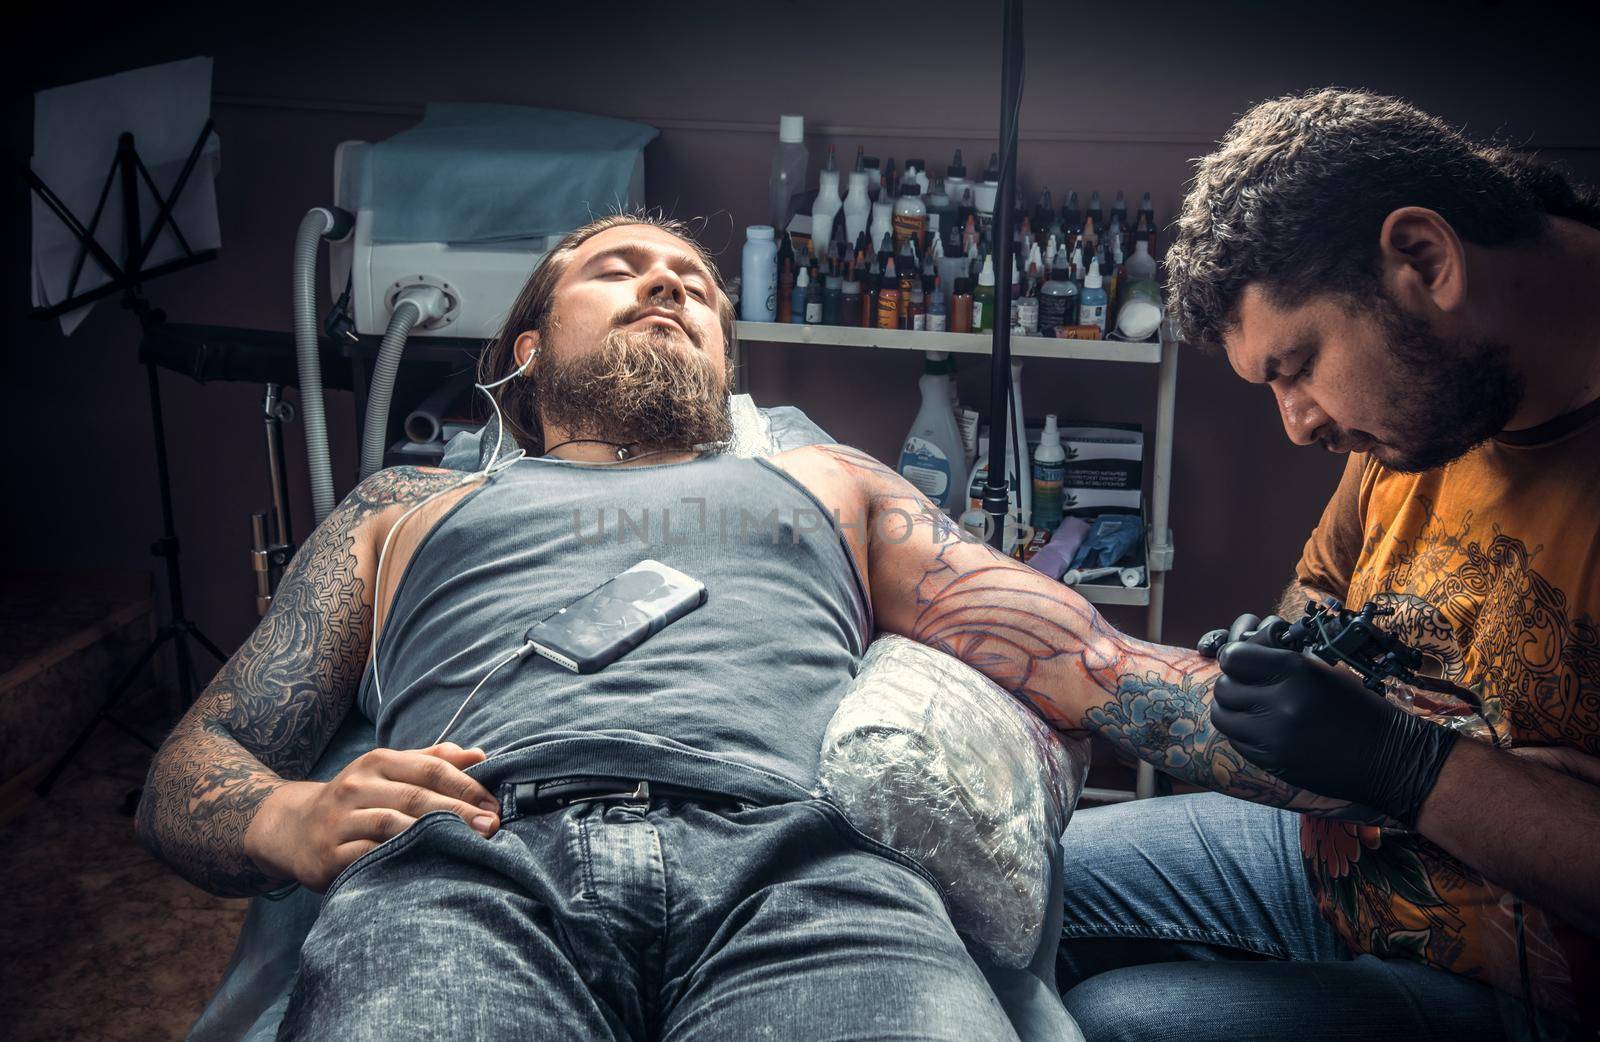 Tattoo specialist working tattooing in tattoo parlor by Proff